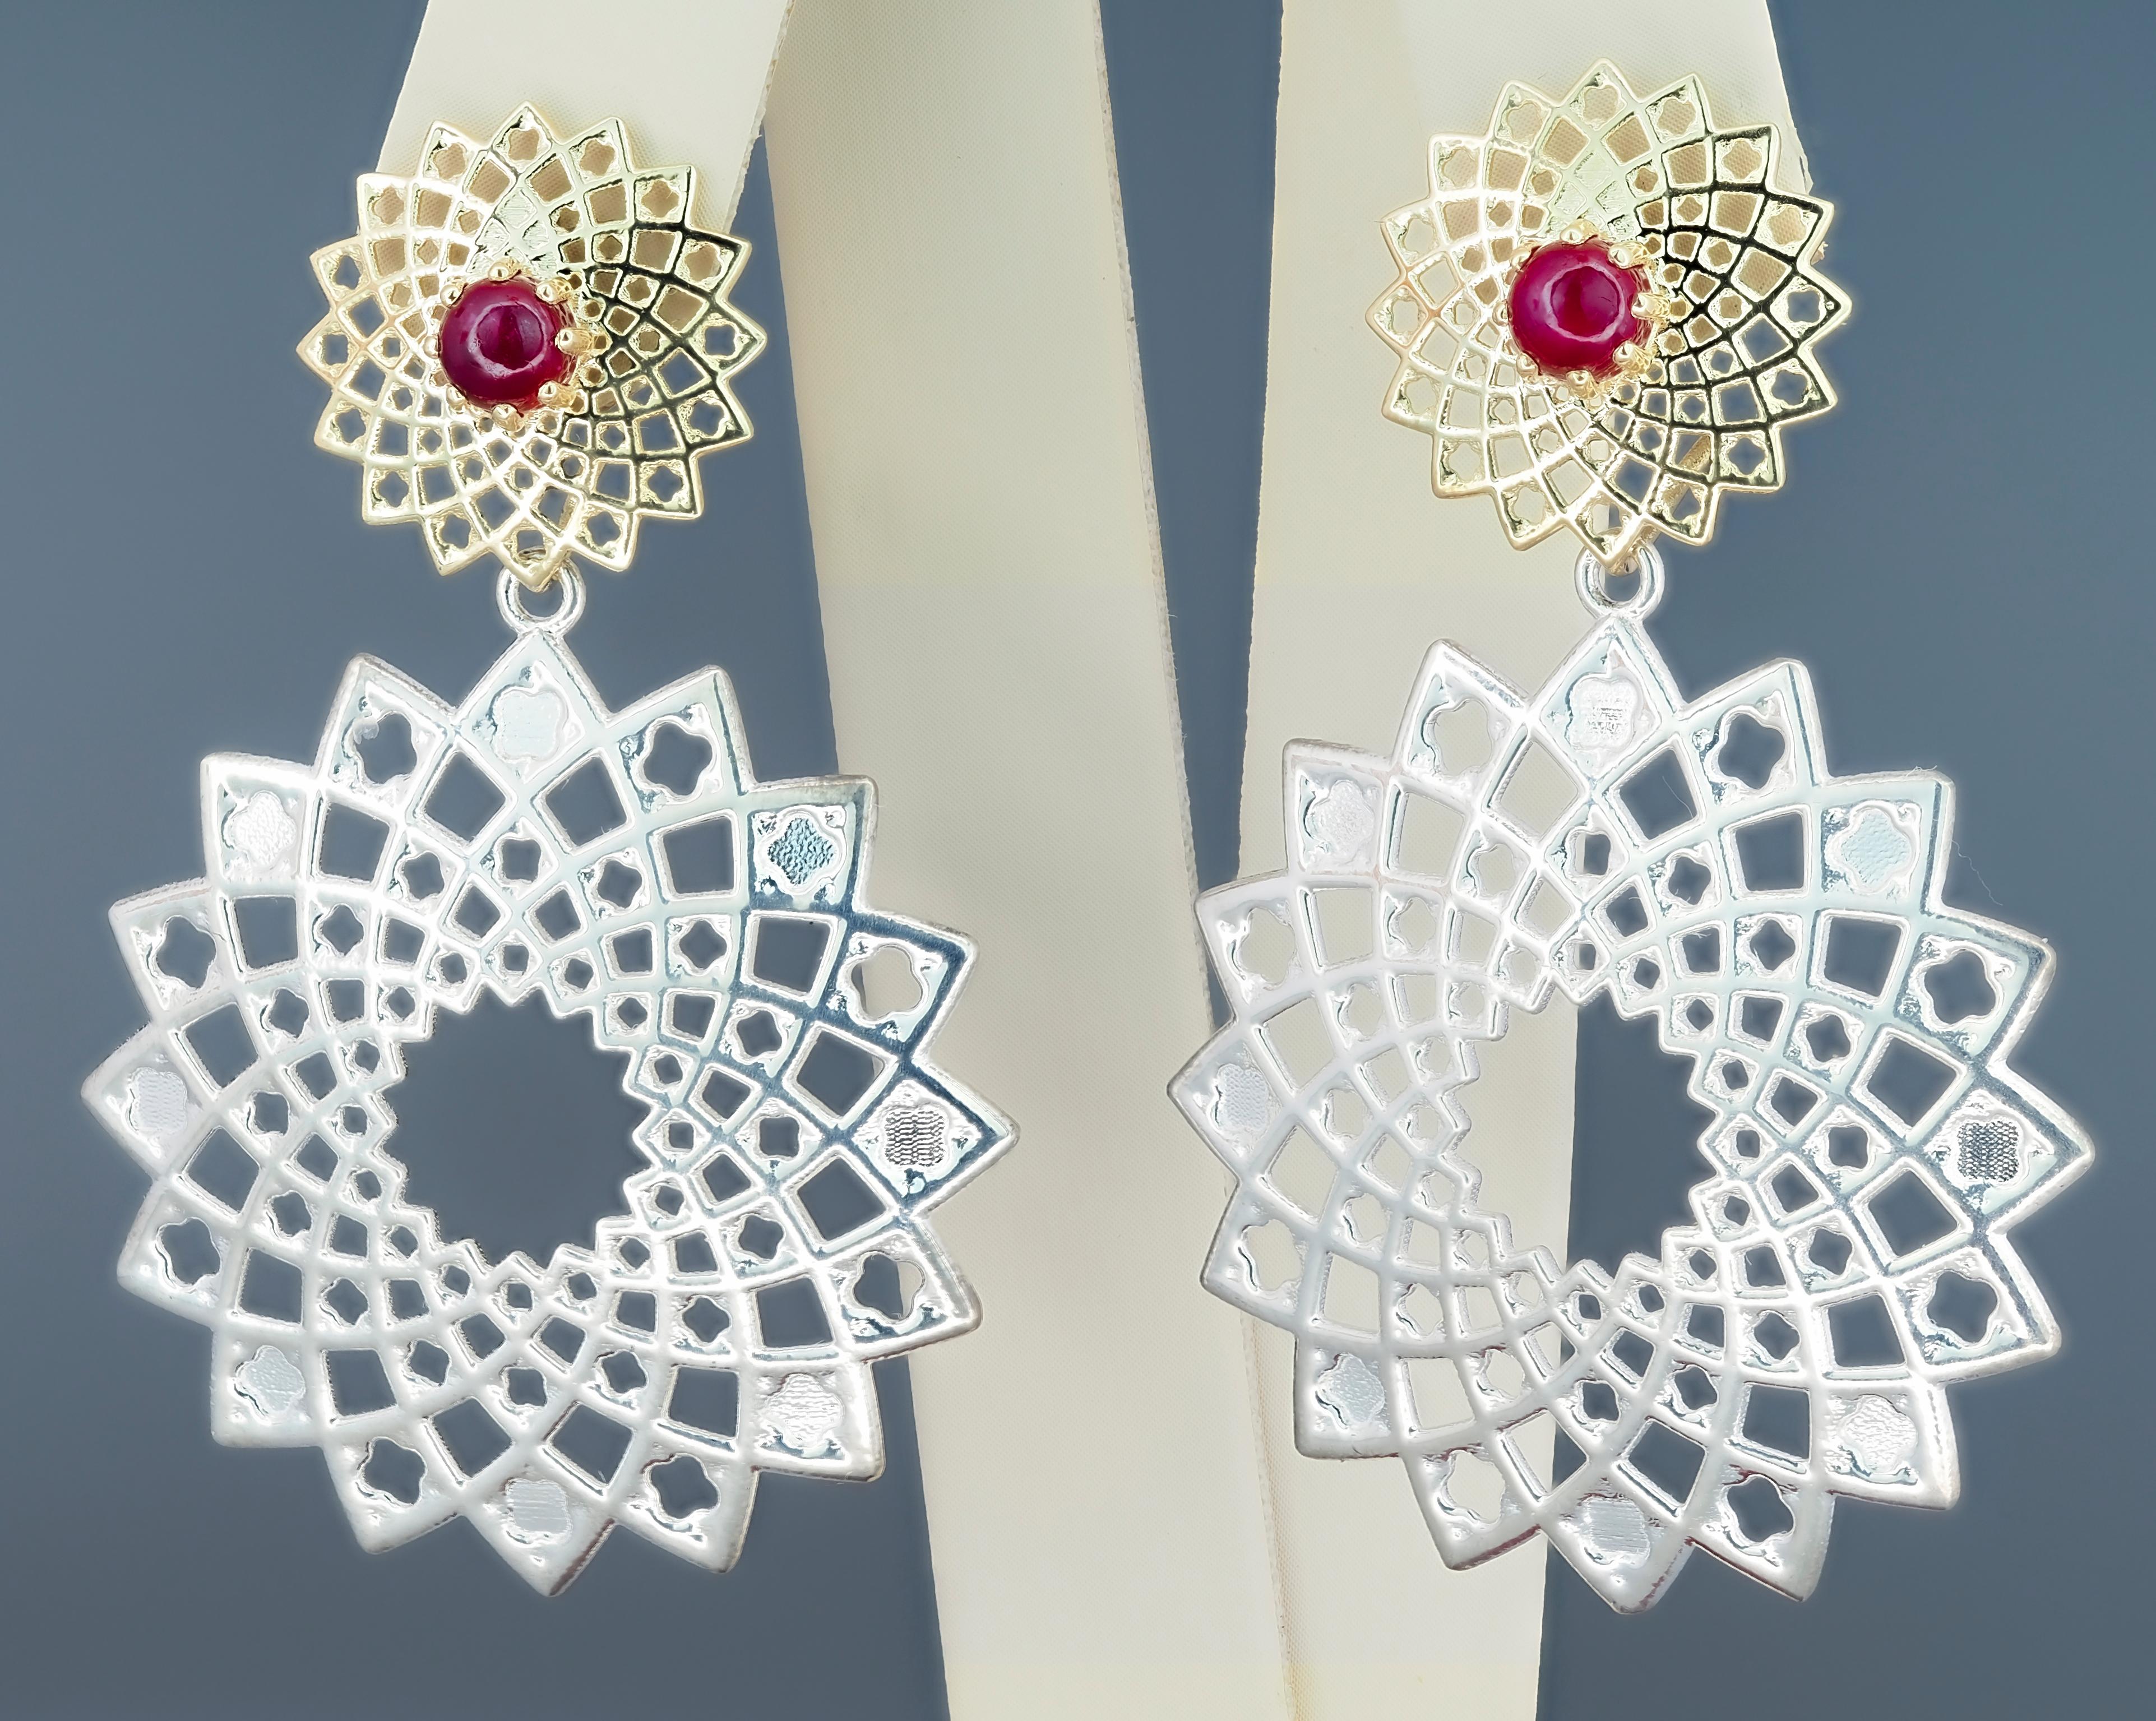 Gold and Silver transformable earrings studs with earrings with natural rubies. Different type wearing massive earrings with natural rubies - lower part removable. You can wear earring in different ways: as studs (for everyday wear ring) and as a